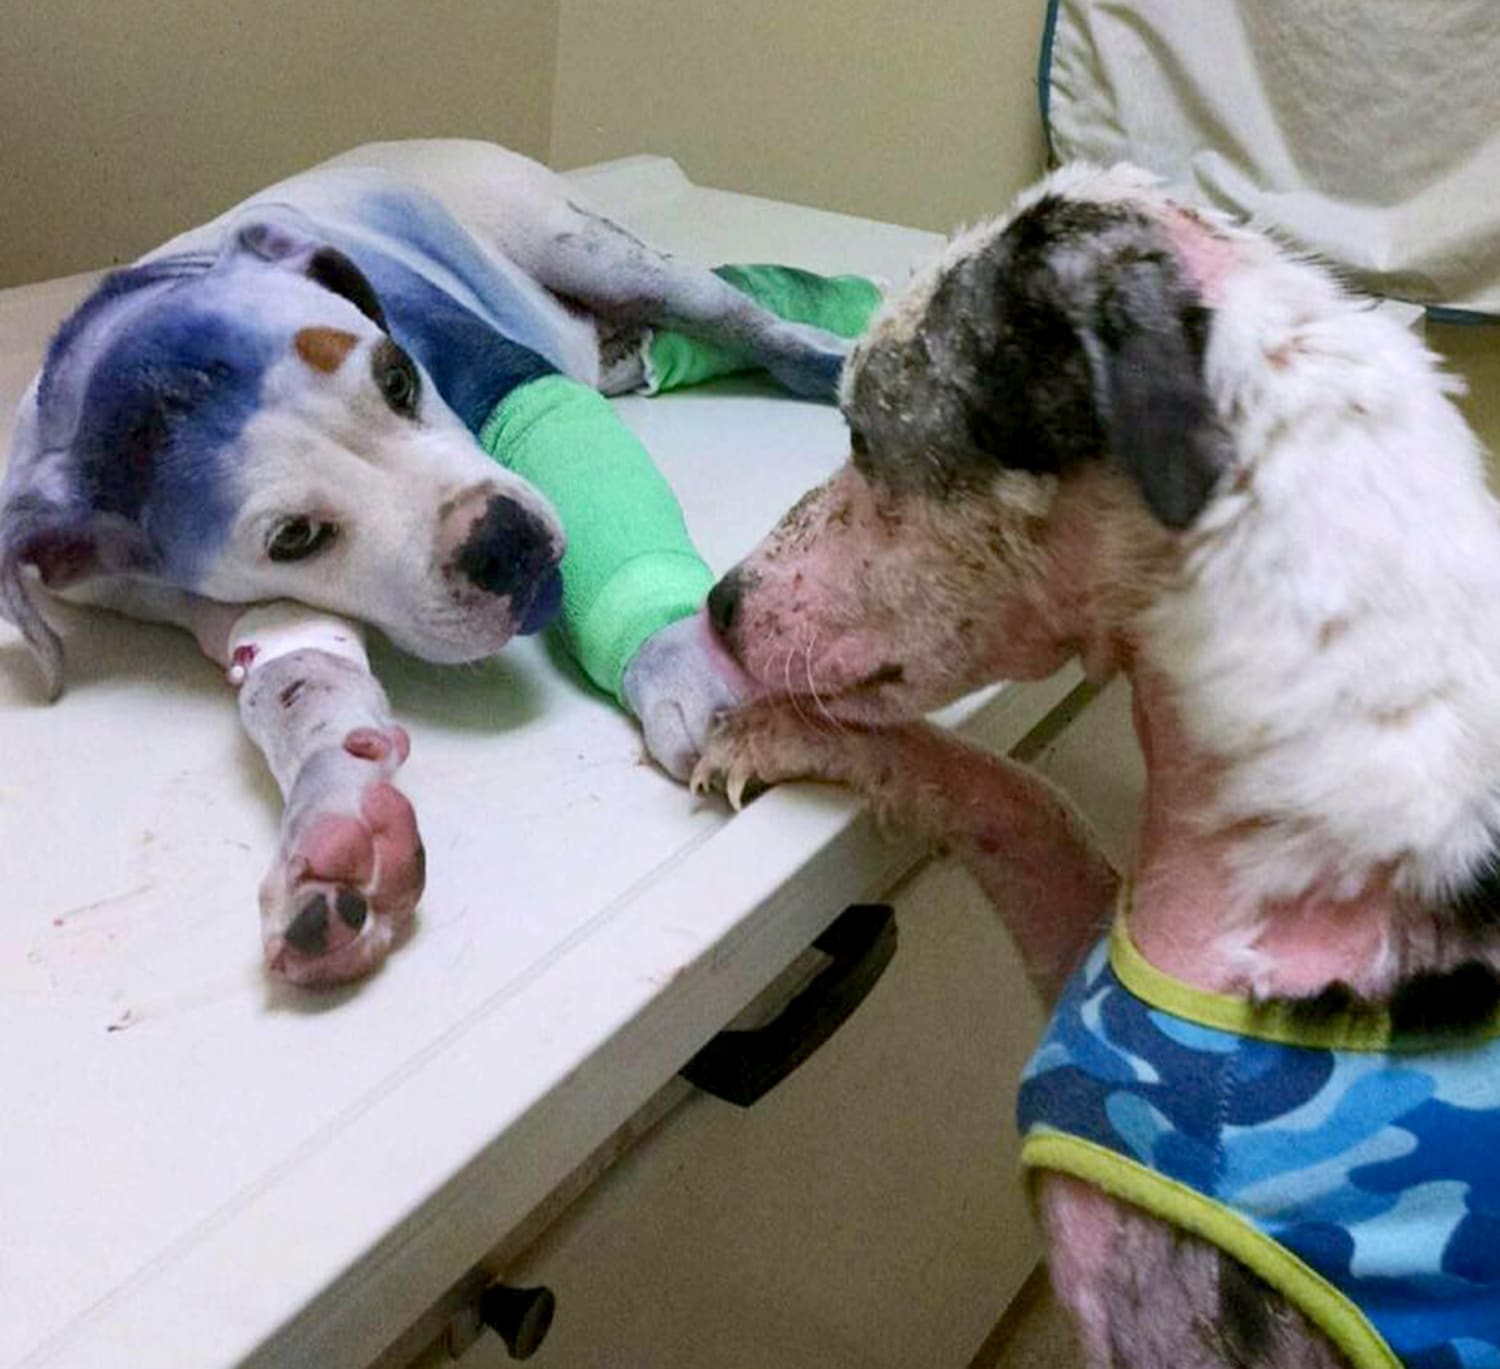 See the moment an abused dog comforted a fellow rescue at shelter